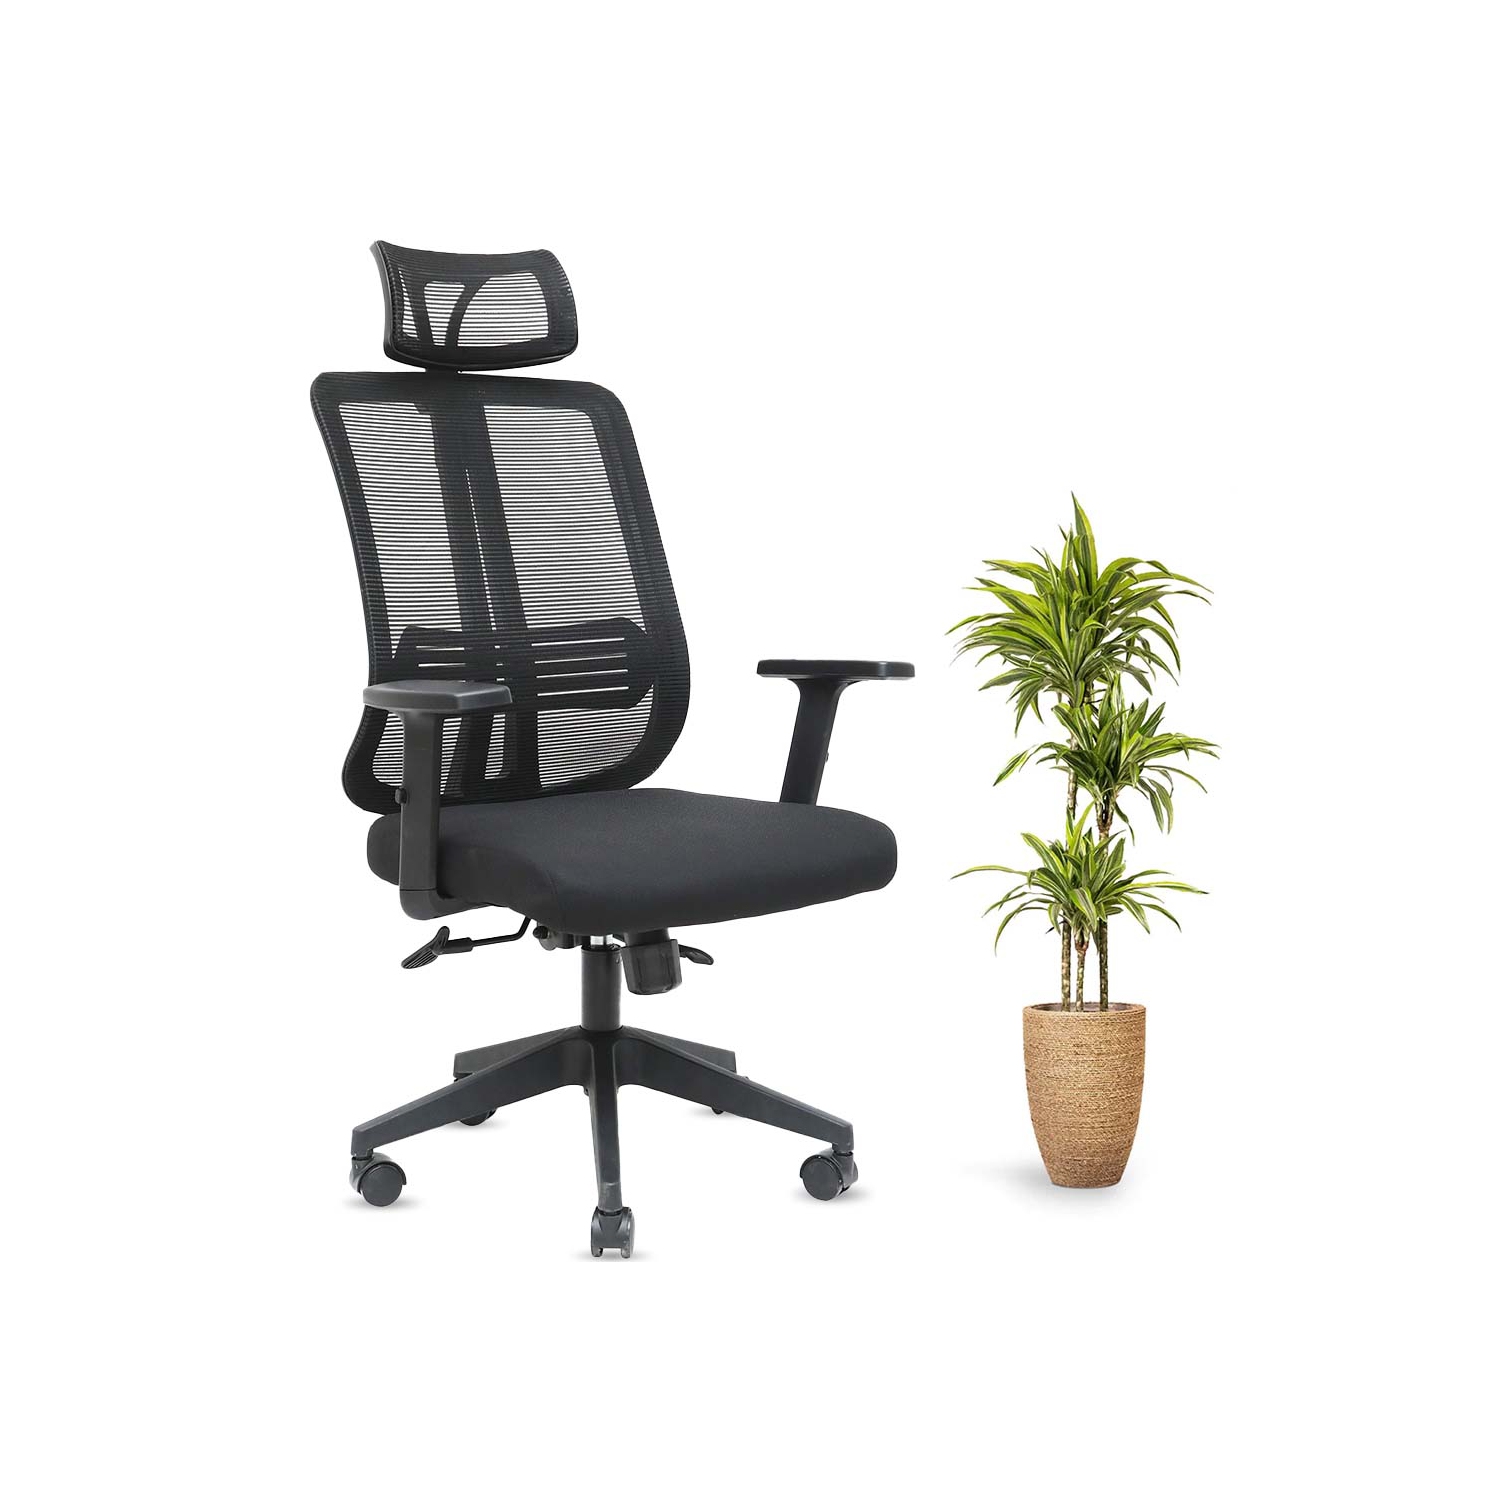 MotionGrey Stylish Ergonomic High Mesh Office Chair with Adjustable Head, Armrest & Lumbar Support - Only at Best Buy